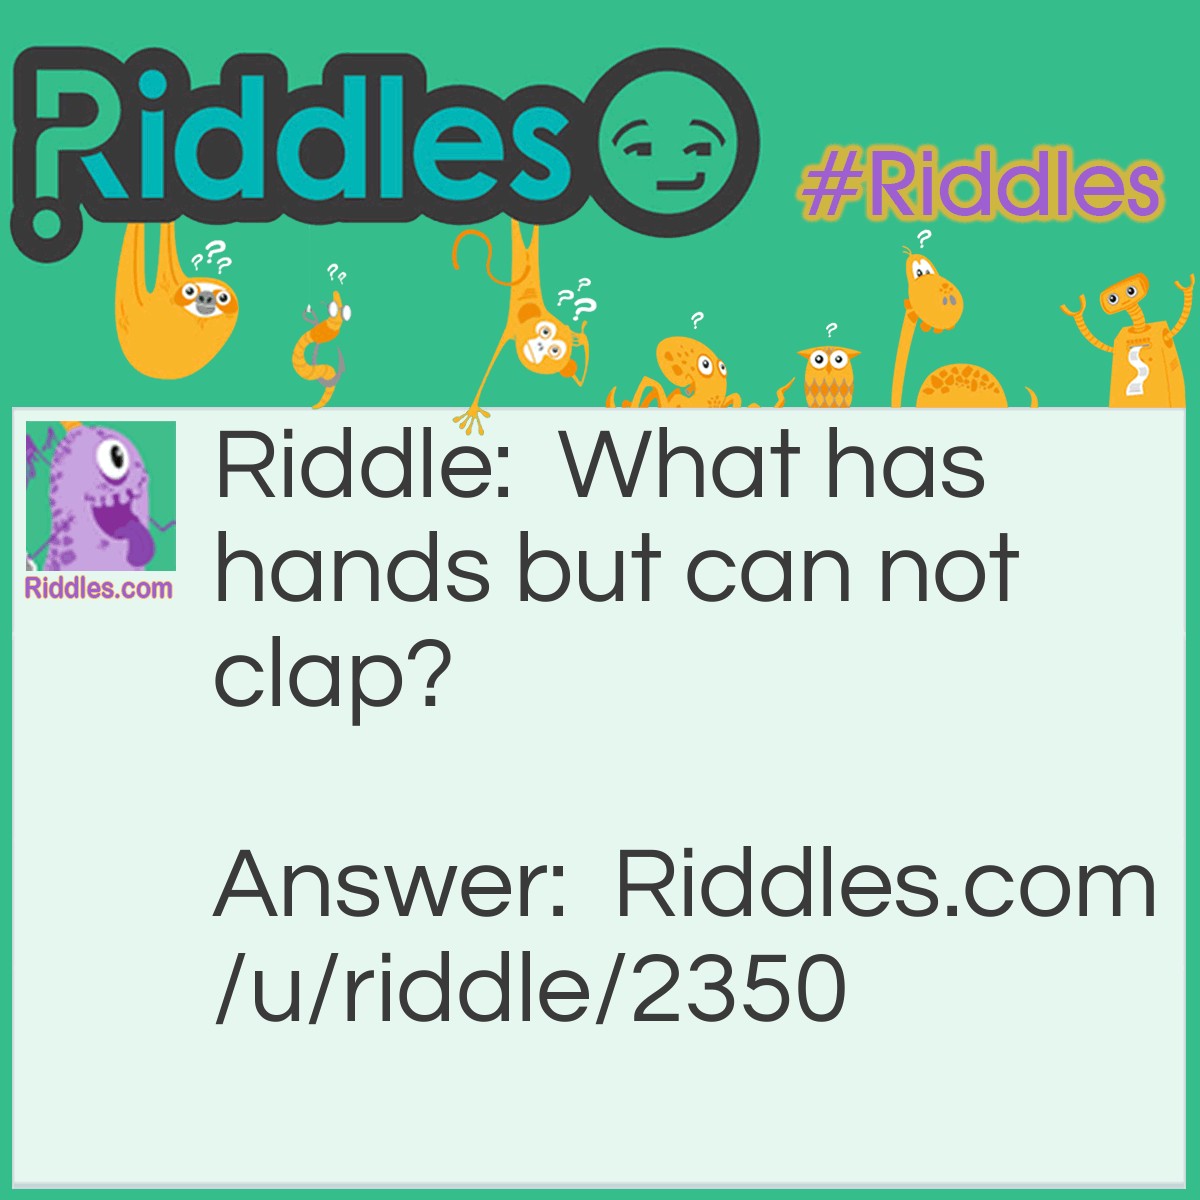 Riddle: What has hands but can not clap? Answer: A clock.